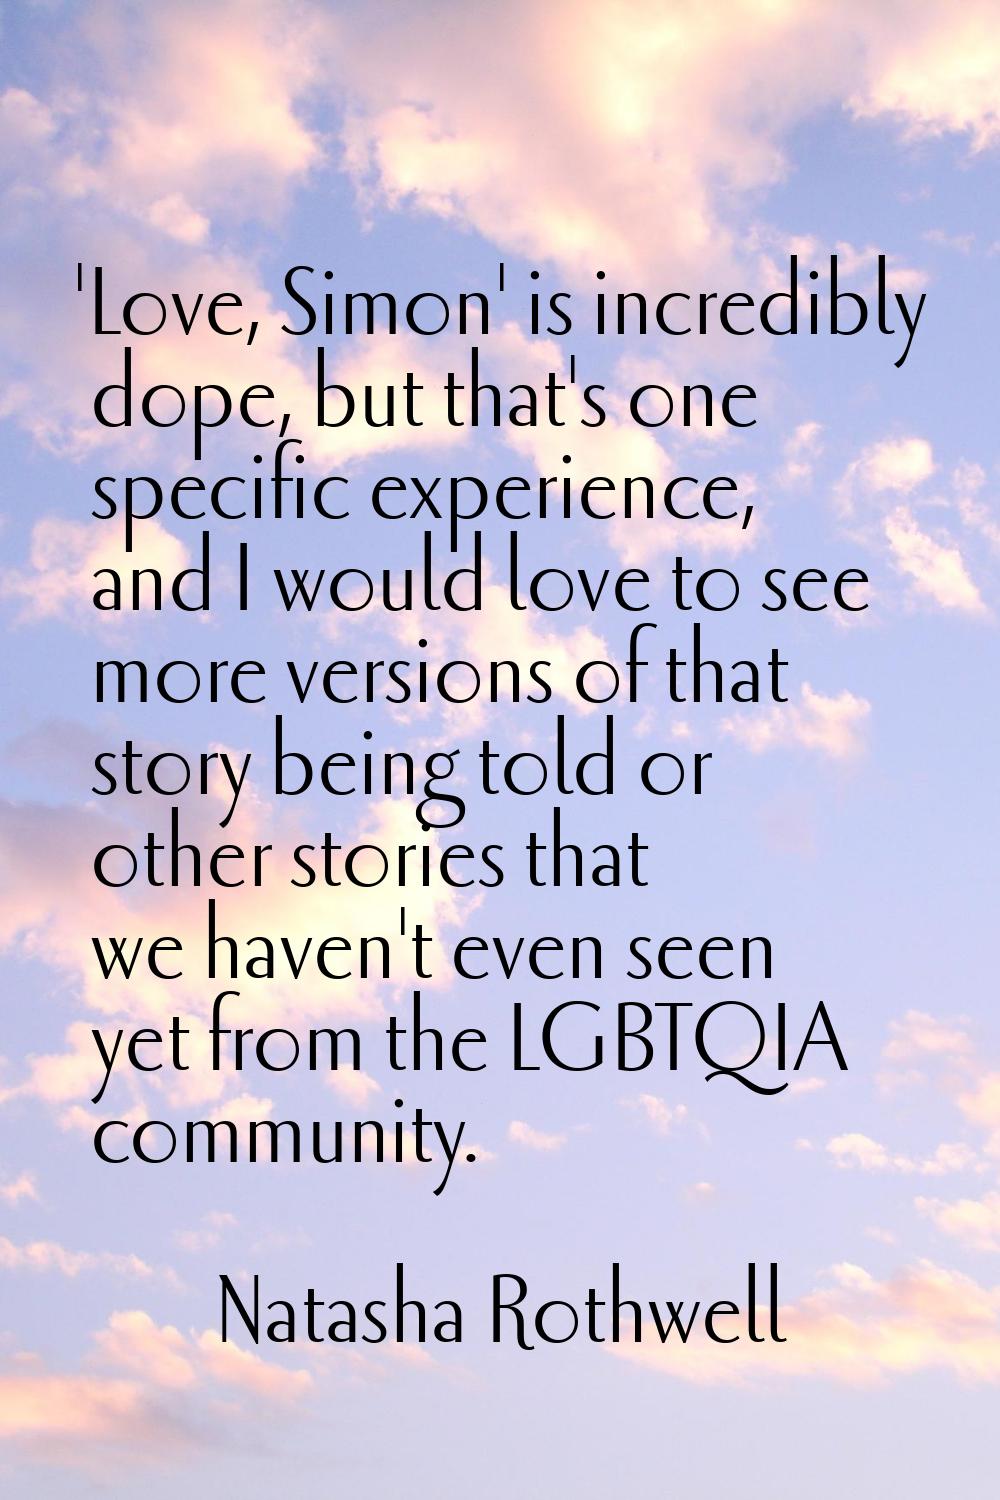 'Love, Simon' is incredibly dope, but that's one specific experience, and I would love to see more 